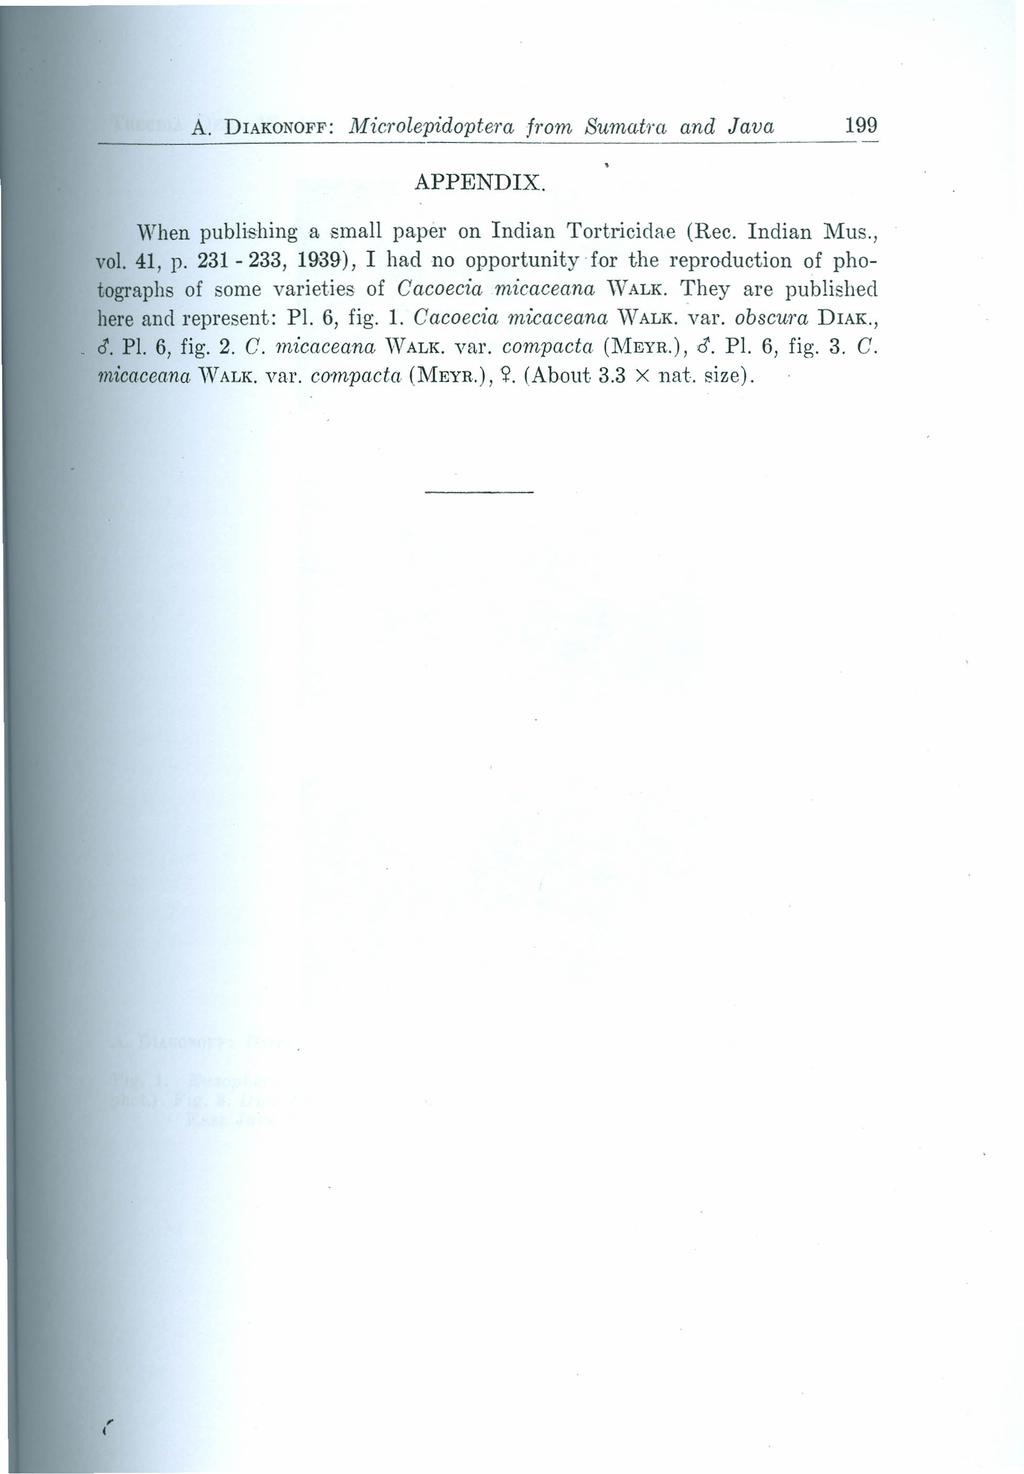 A. DIAKONOFF: Microlepidoptera from Sumatra and Java 199 APPENDIX. When publishing a small paper on Indian Tortricidae (Rec. Indian Mus., vol. 41, p.